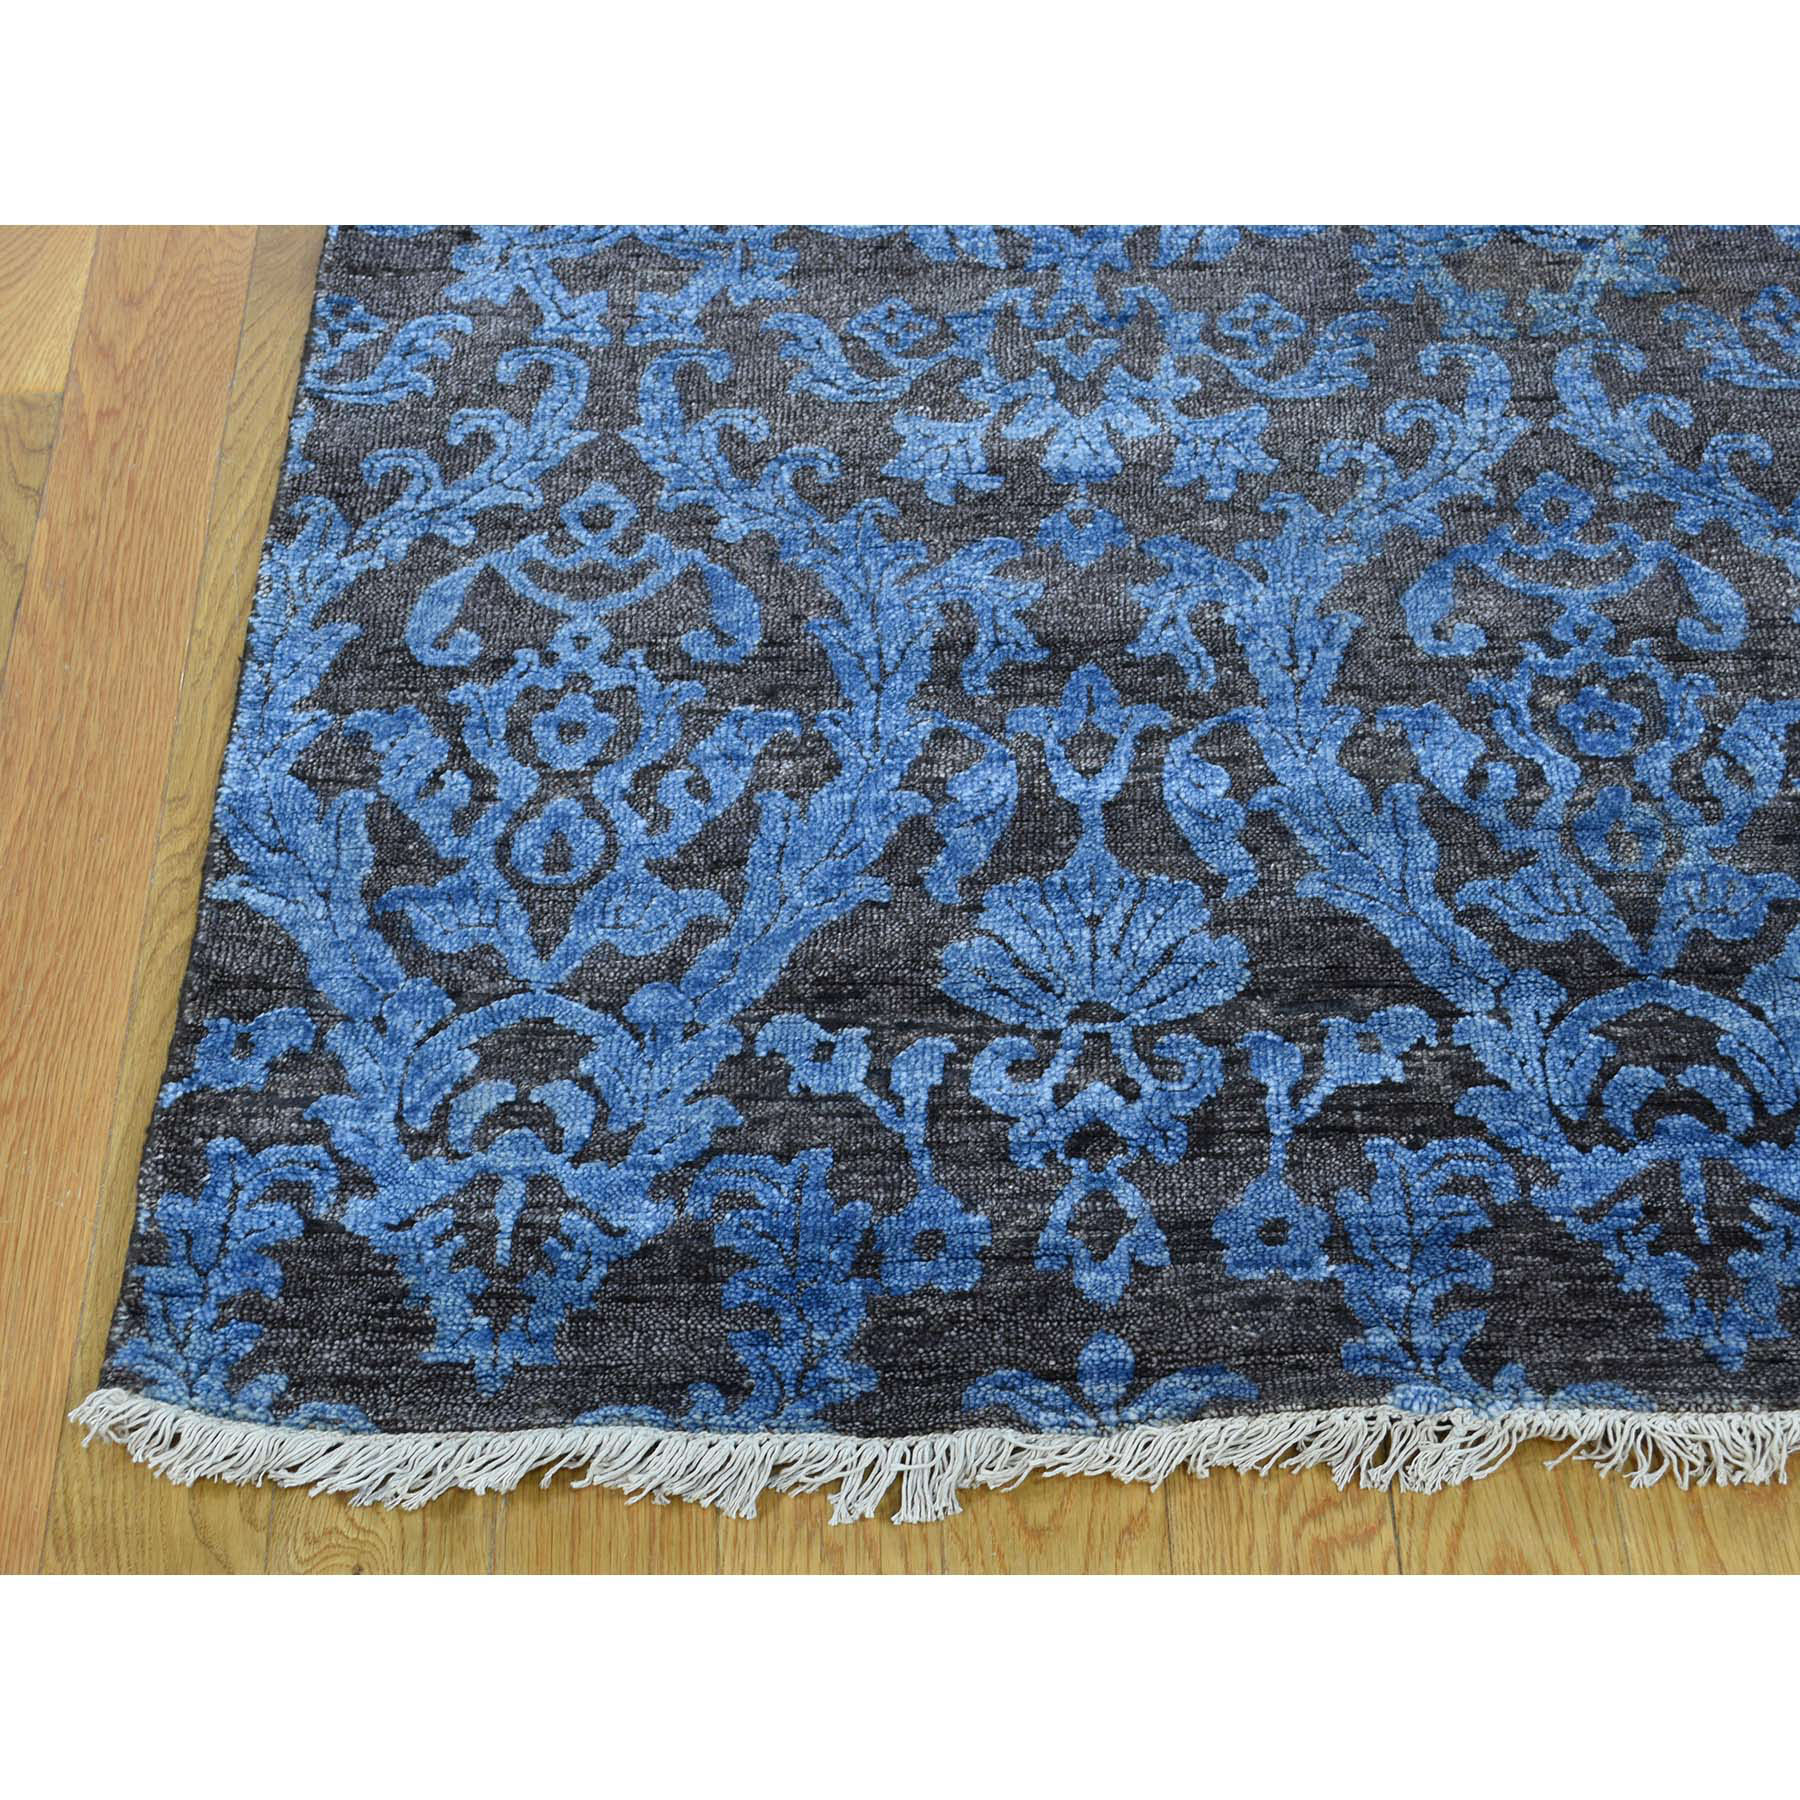 10-x13-10  Hand-Knotted Damask Design Wool and Silk Hi and Lo Pile Rug 